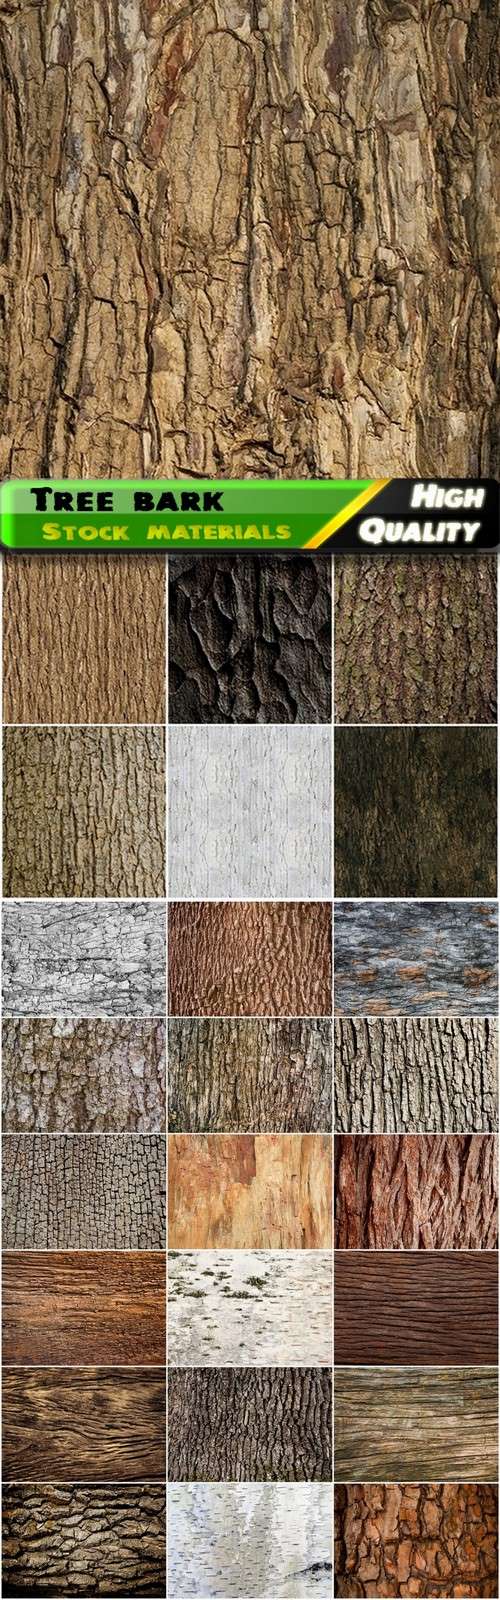 Textures of tree bark and wood - 25 HQ Jpg